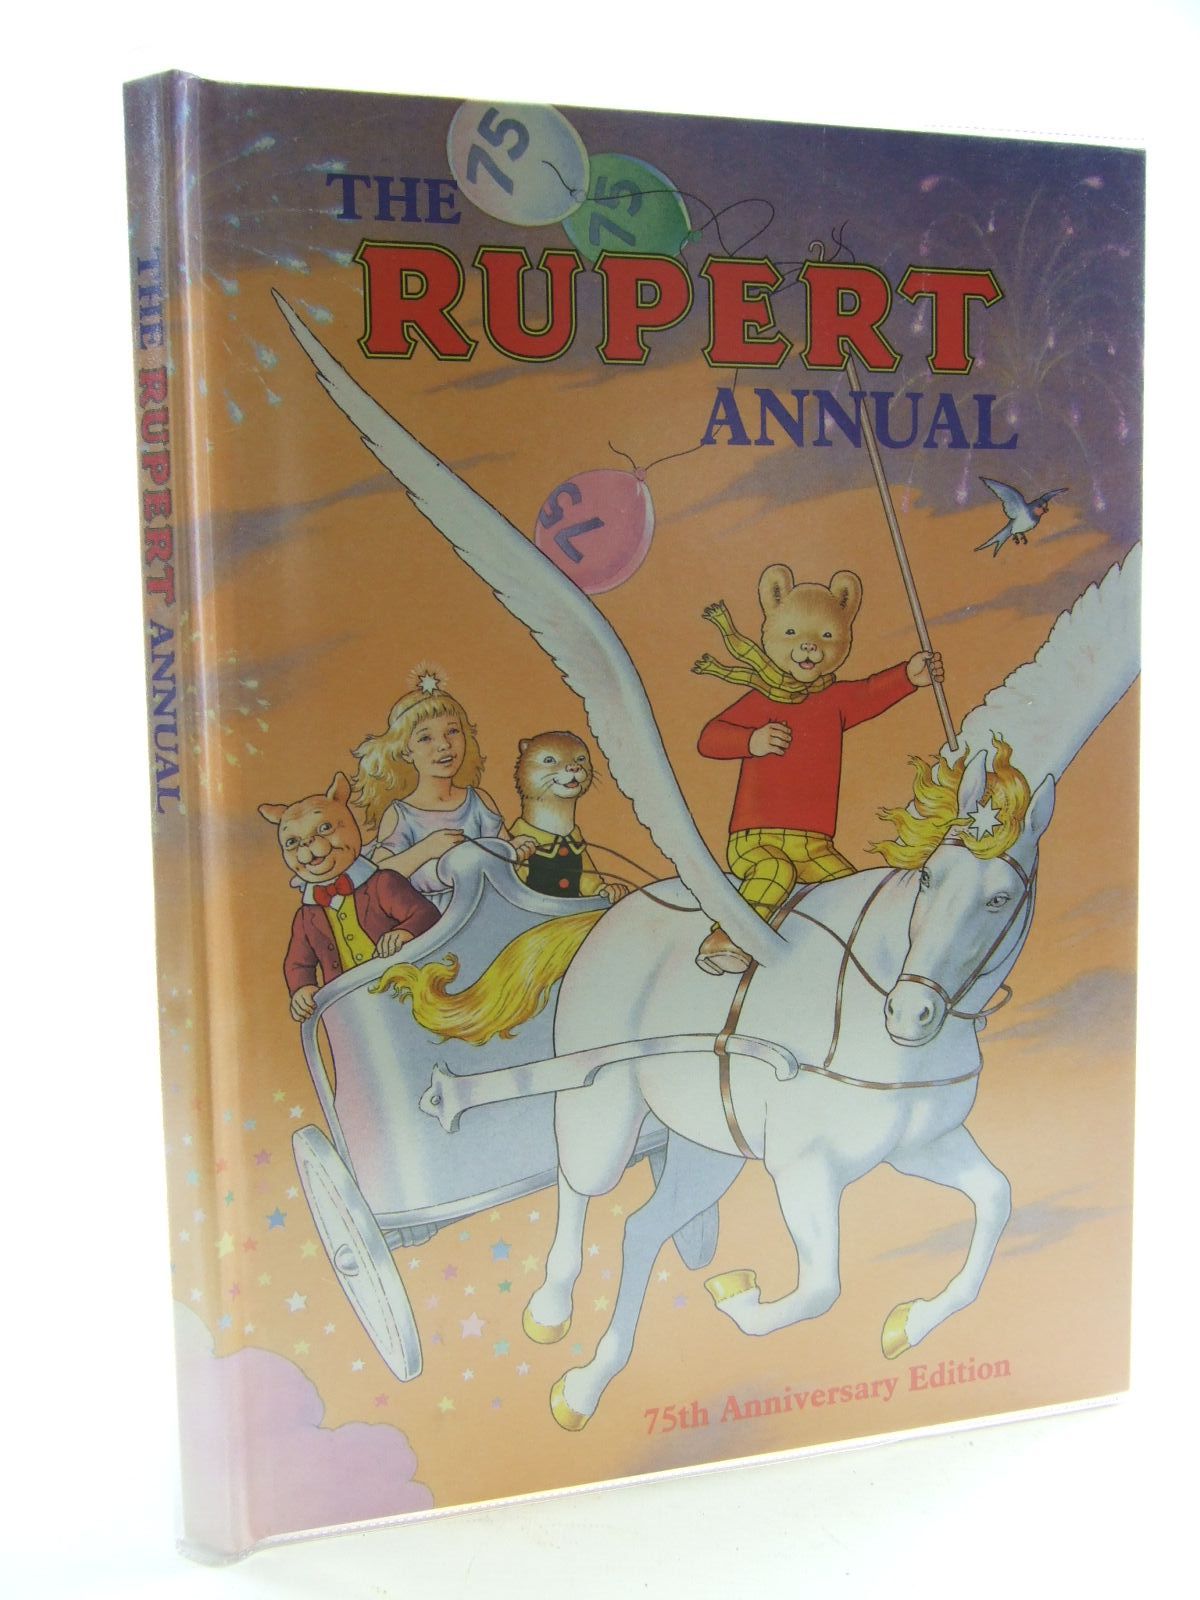 Cover of RUPERT ANNUAL 1995 by Ian Robinson